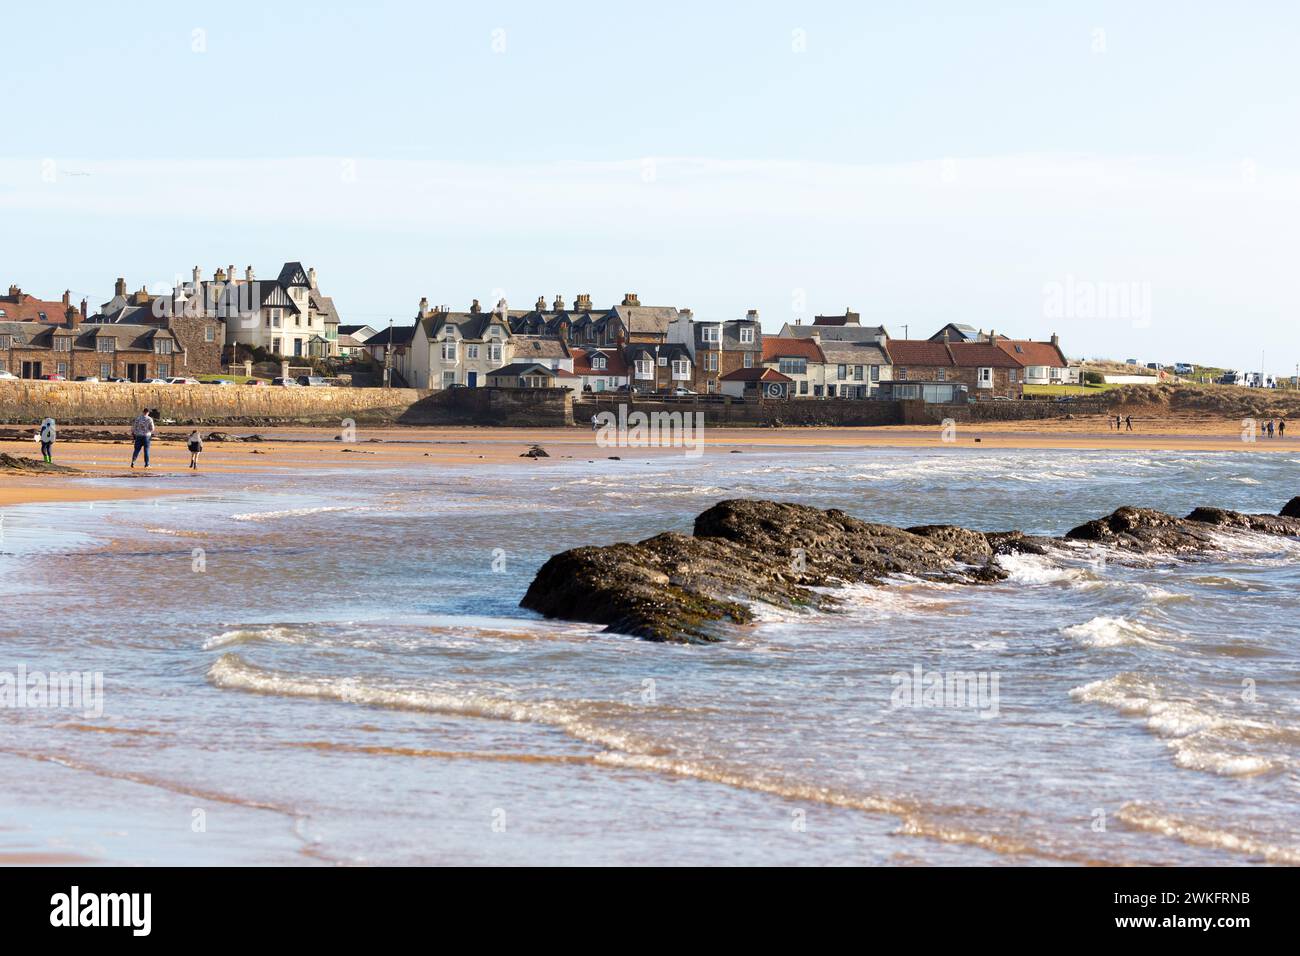 Seafront houses in Elie Scotland Stock Photo